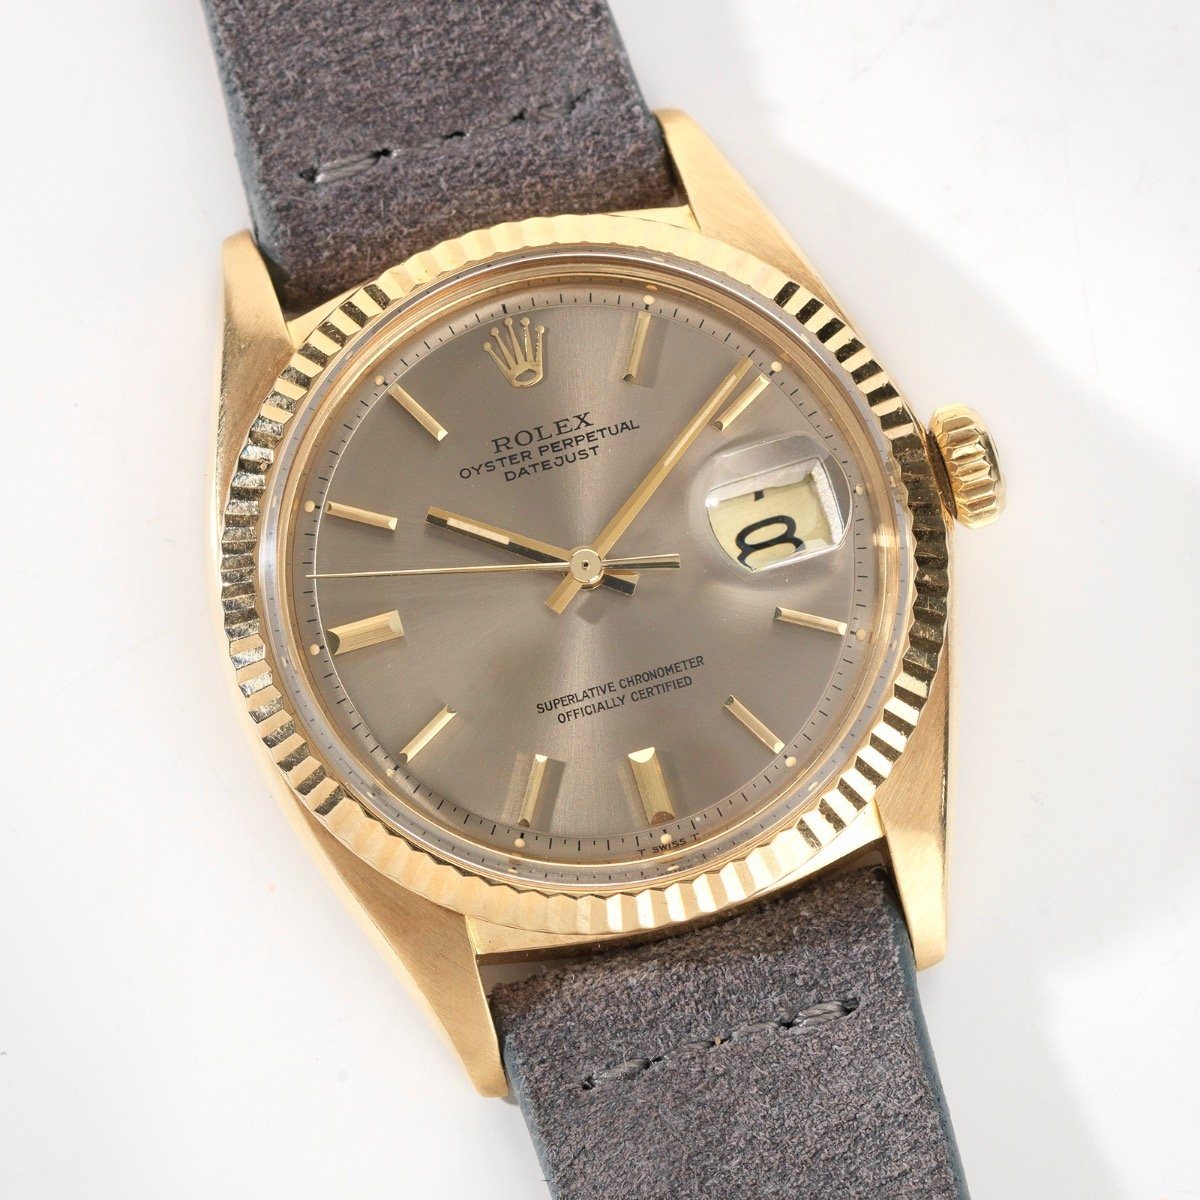 Rolex Datejust Reference 1601 18ct Gold